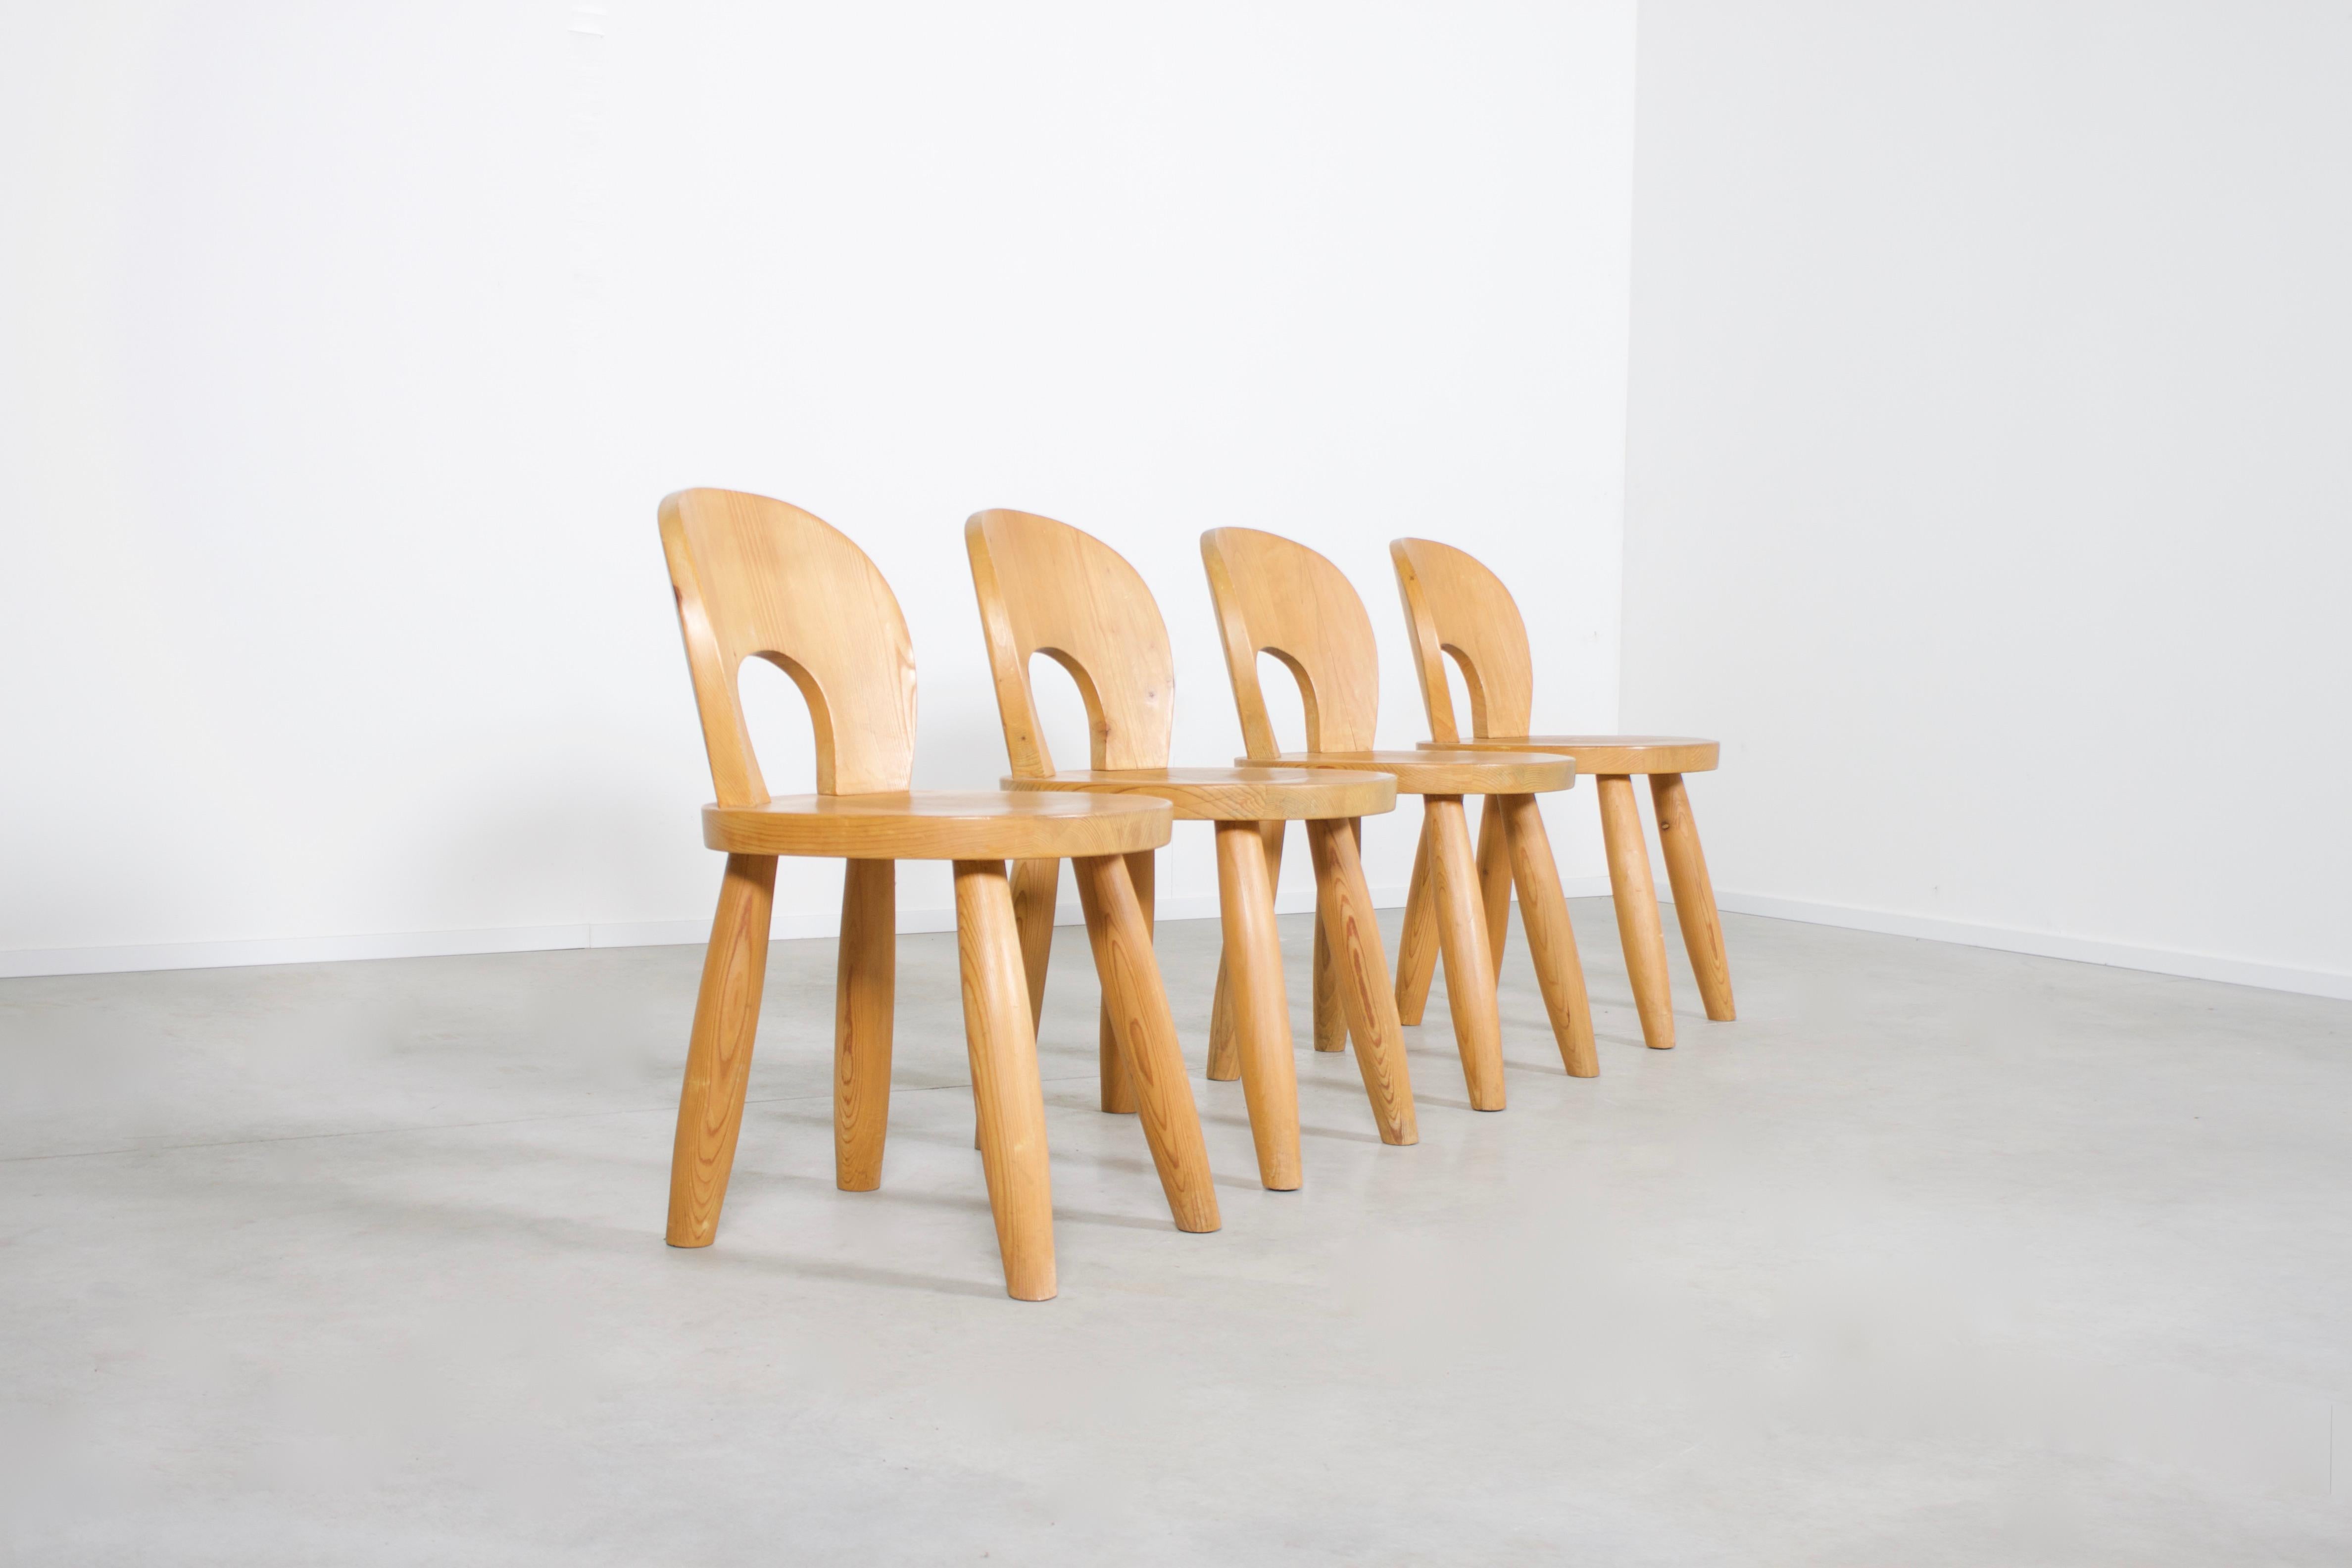 Set of four solid pine chairs in very good condition.

The chairs are made by Gebrüder Thonet Vienna in the late 1970s (stamped on the underside of the seat)

They are made of solid pine wood.

The chairs have thick heavy legs and a low round back,